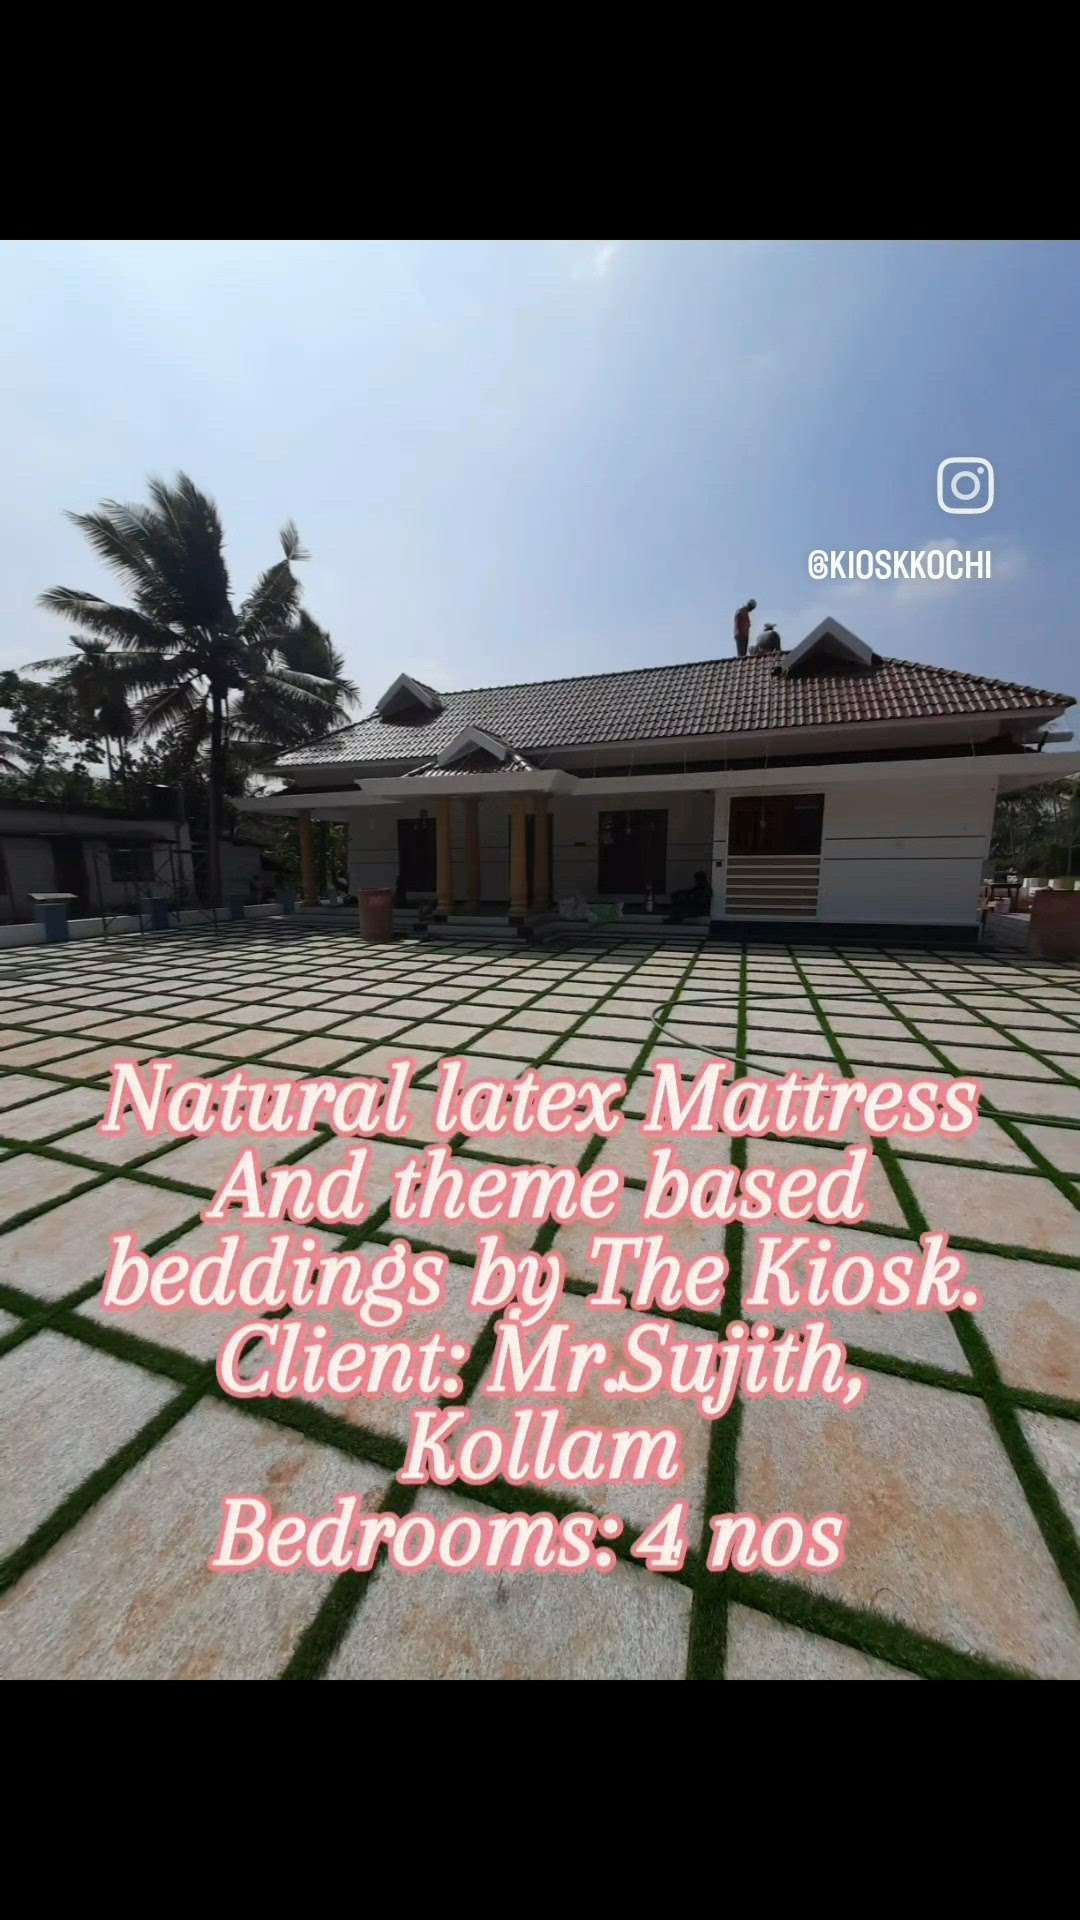 Natural Latex Mattress and Beddings by The Kiosk.
Client: Mr.Sujith
Location:, Sooranad, Kollam.
Bedrooms: 4 nos
Mattress: Indofrench Natural Latex.
Beddings: Comforto Premium 
Call for your bedroom makeover +918714225603.


 #Mattresses  #Mattress  #latexmattress #naturallatex  #newhome  #MasterBedroom  #KingsizeBedroom  #bedroominterio